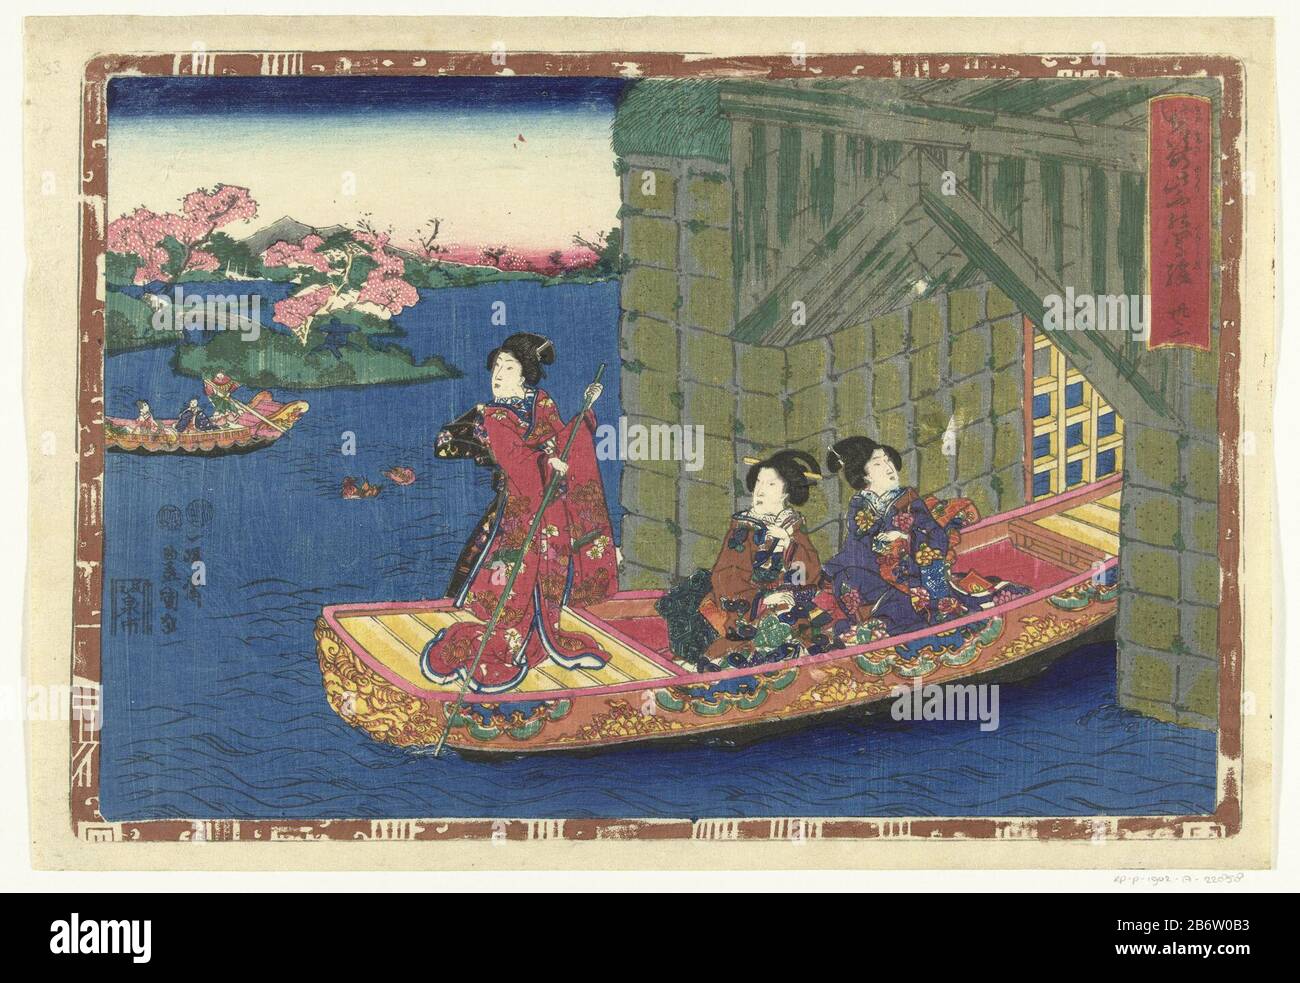 Hoofdstuk 33 Getrouwe afbeeldingen van de Schitterende Prins (serietitel) Sono sugata Hikaru no utsushi-e (serietitel op object) Three women in a rowboat sailing through tunnel; in the background a second rowboat and landscape with flowering trees. Presentation surrounded by brown edge Where: in Genji emblemen. Manufacturer : printmaker: Kunisada (I), Utagawa (listed building) censor: Kinugasa Fusajiro (listed building) censor: Murata Heiemon (listed property) Place manufacture: Japan Date: 1851 - 1853 Physical characteristics: color woodblock; line block in black with color blocks material: p Stock Photo